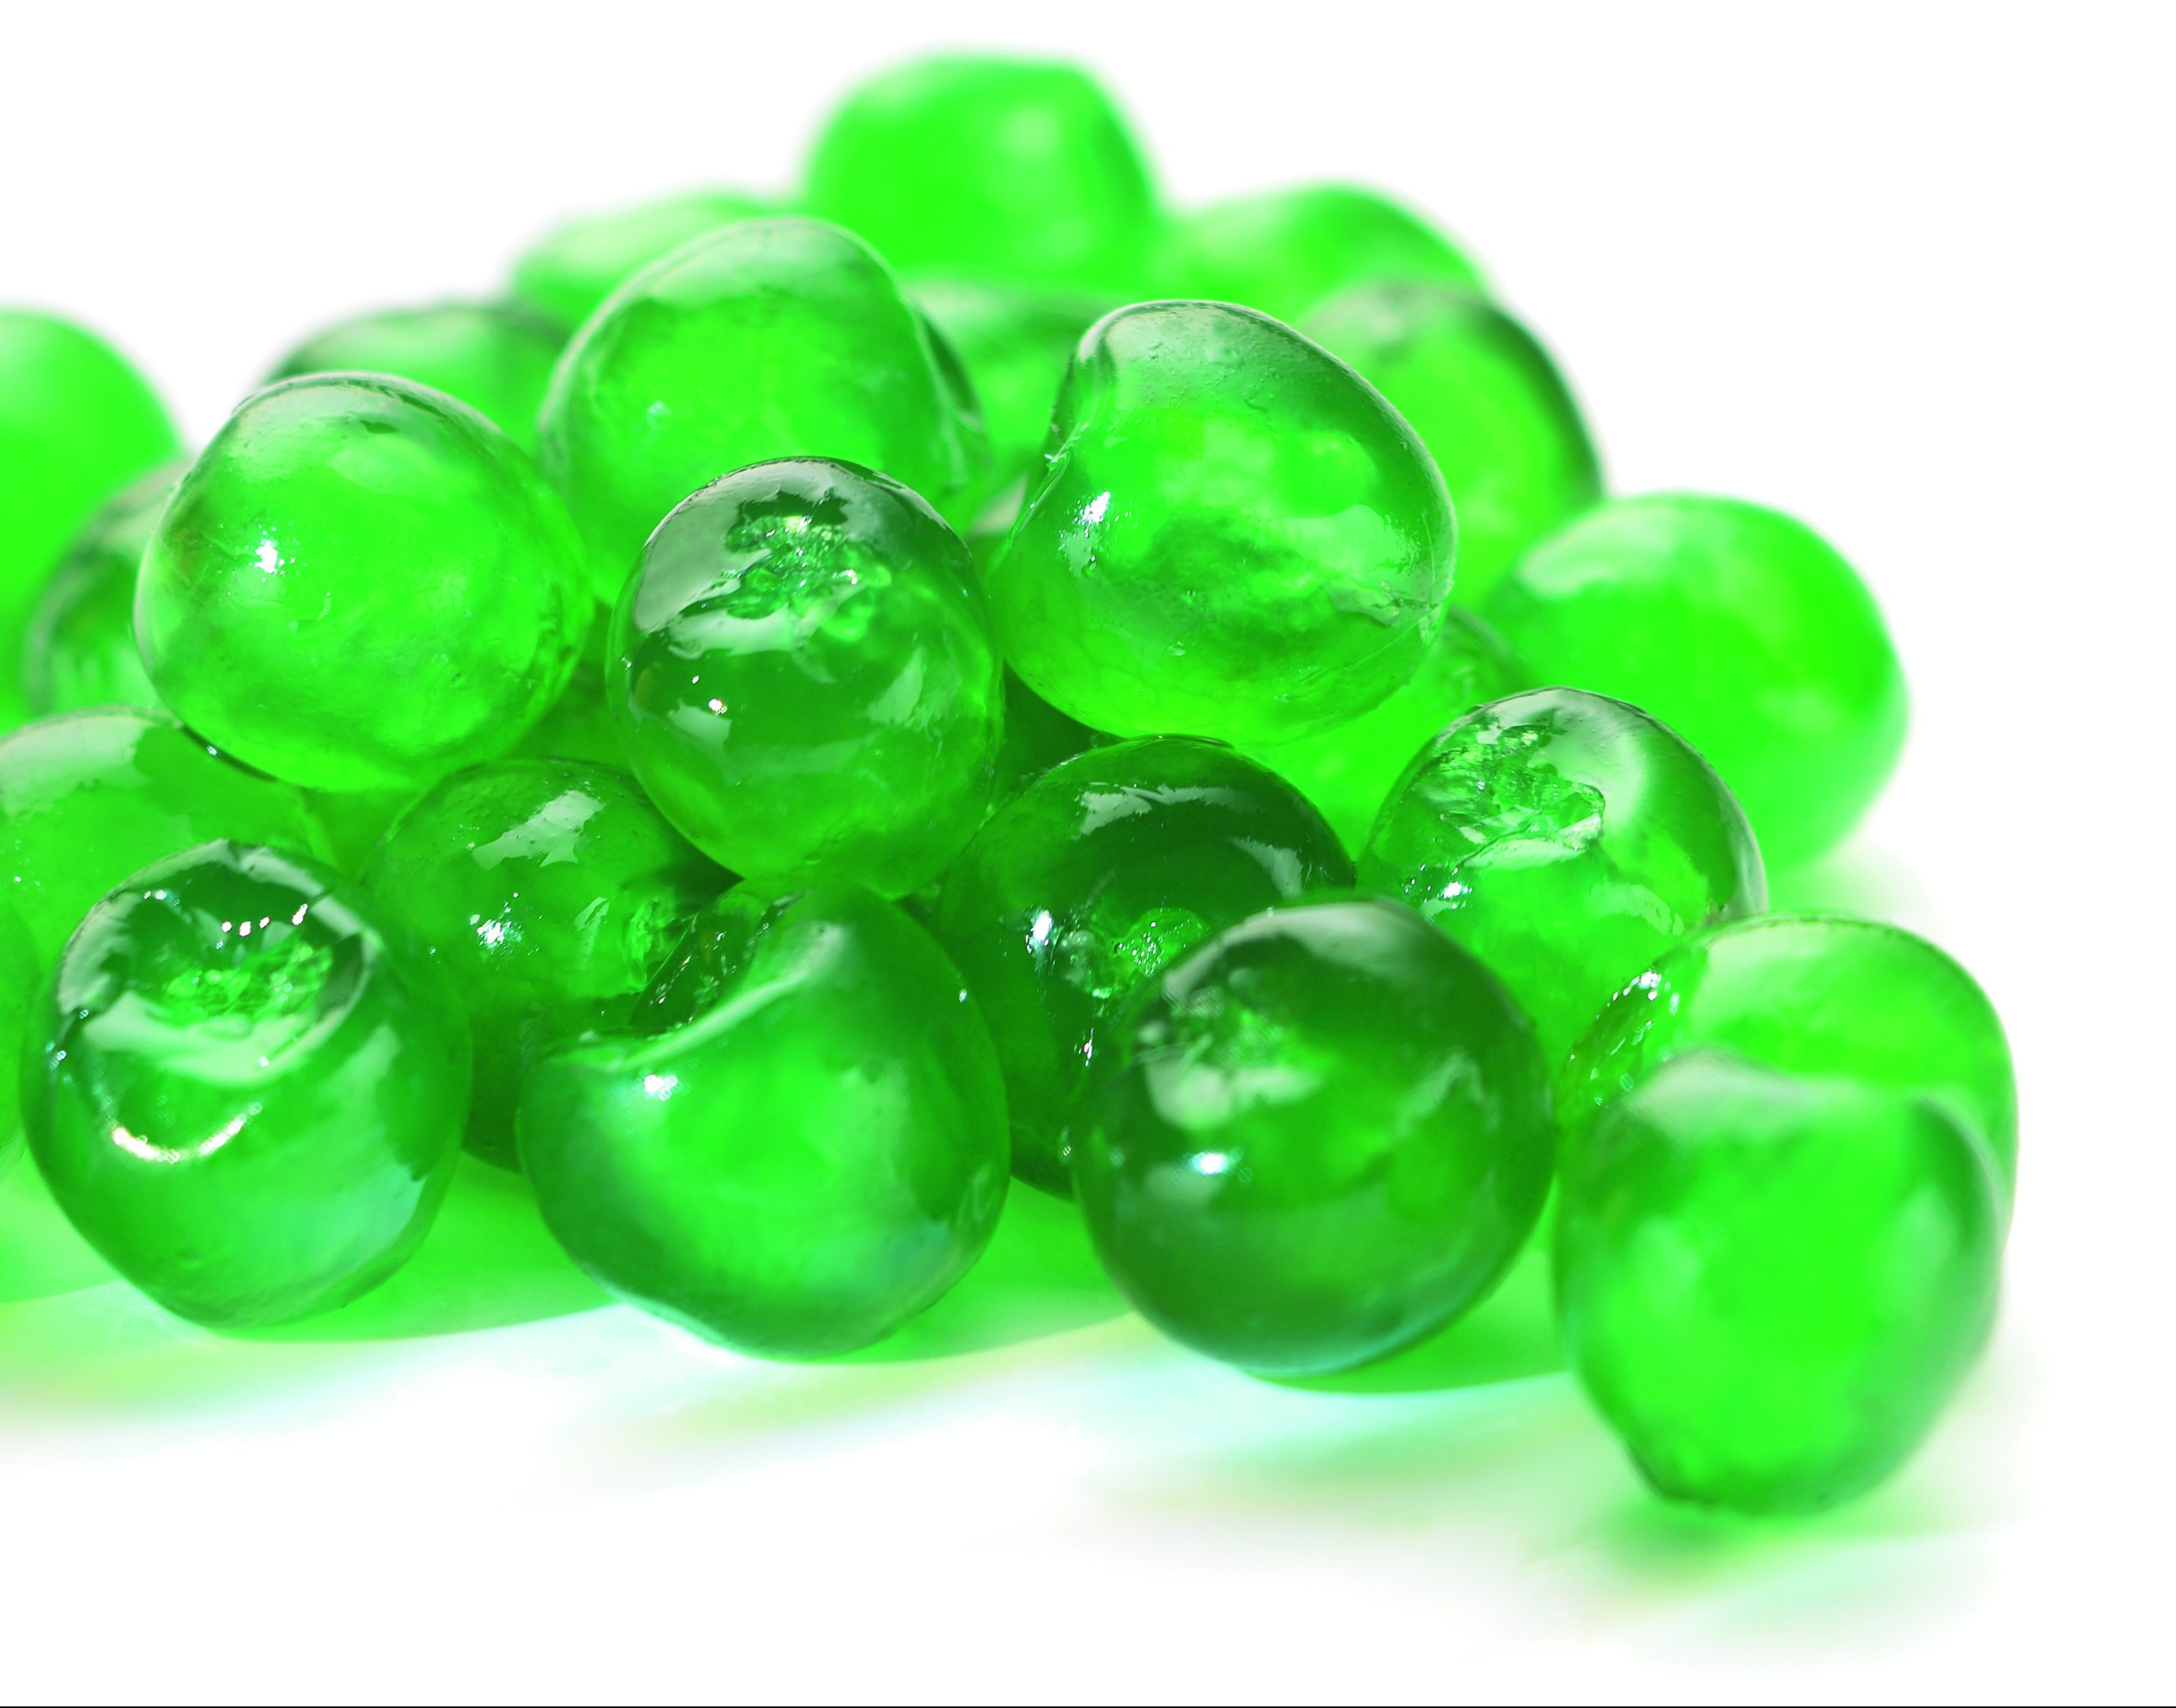 GREEN WHOLE GLACE CHERRIES-2-36094